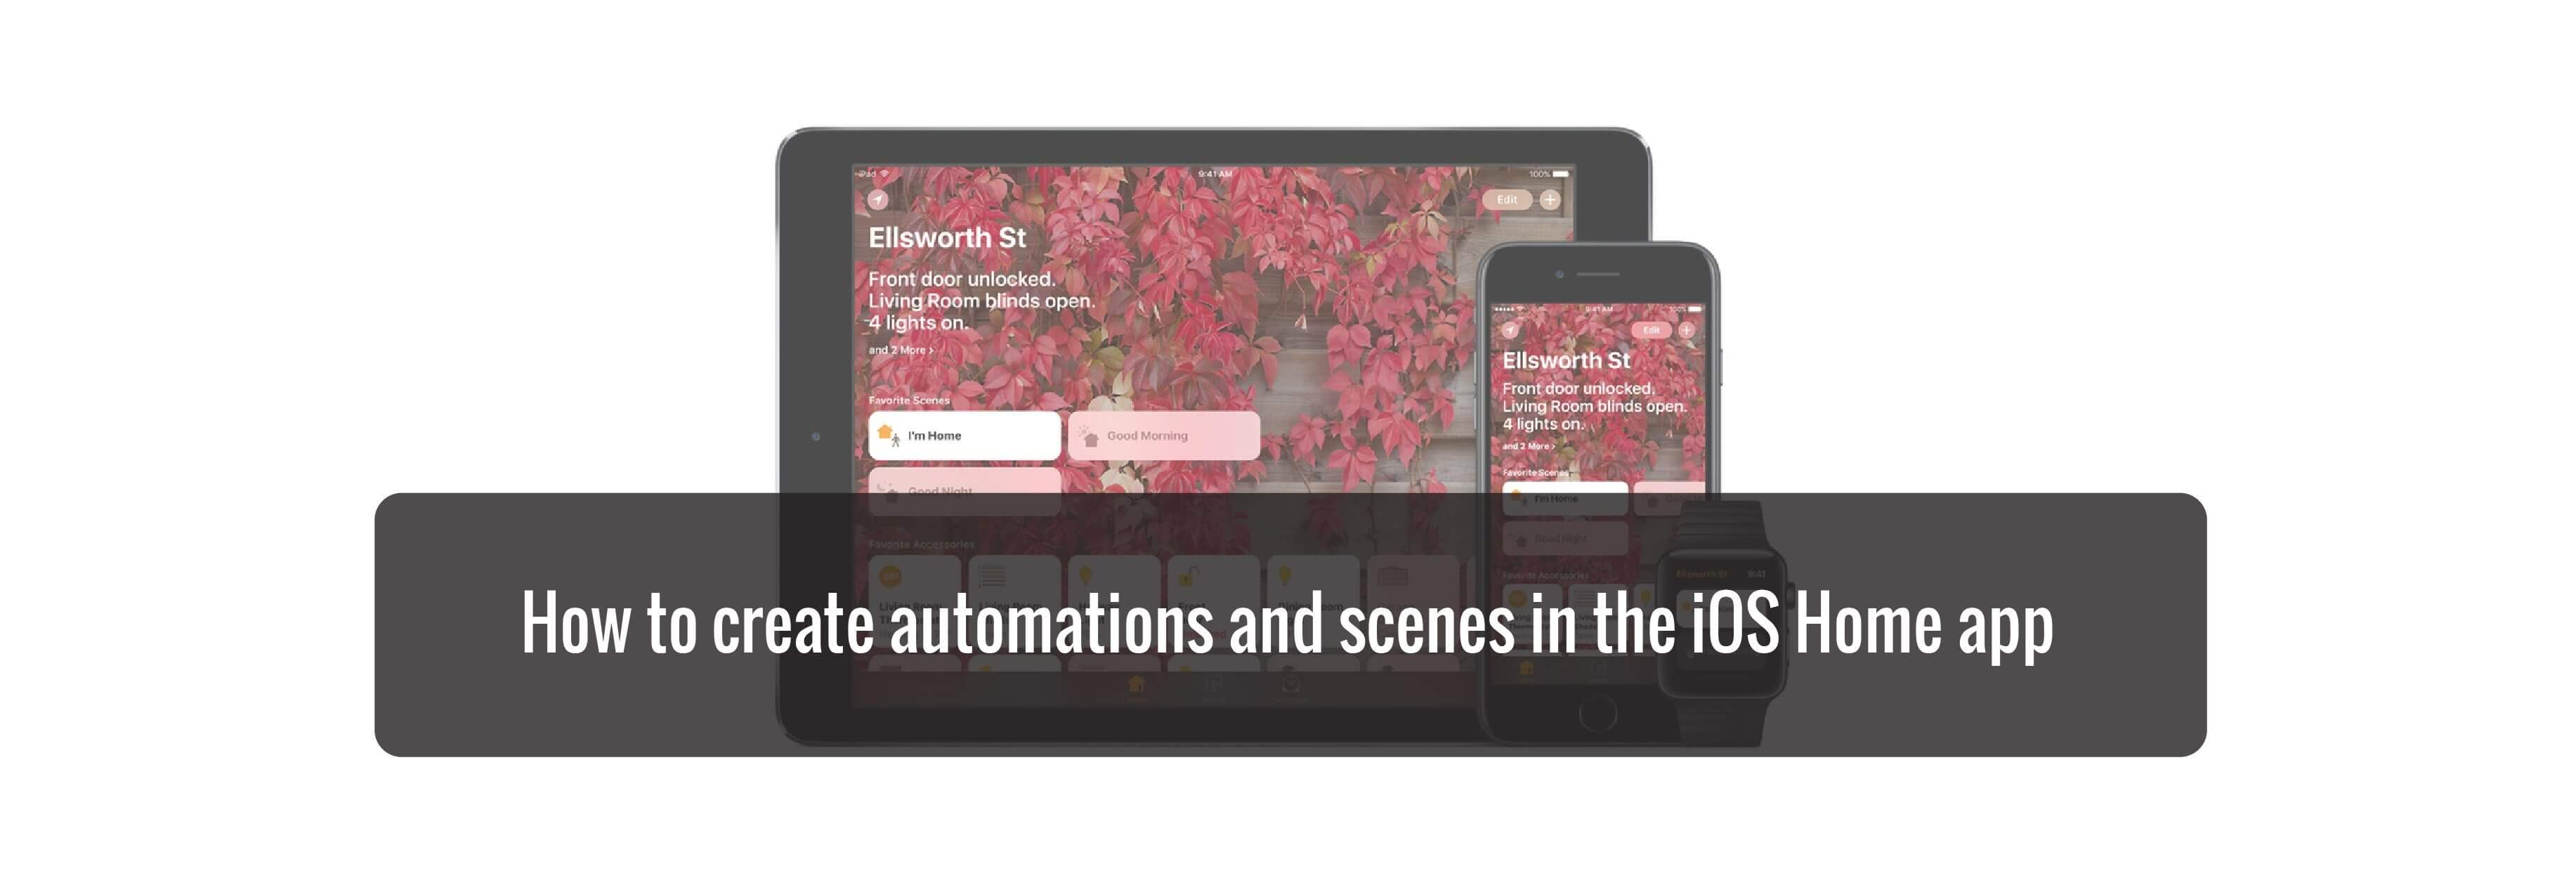 How to create automations and scenes in the iOS Home app